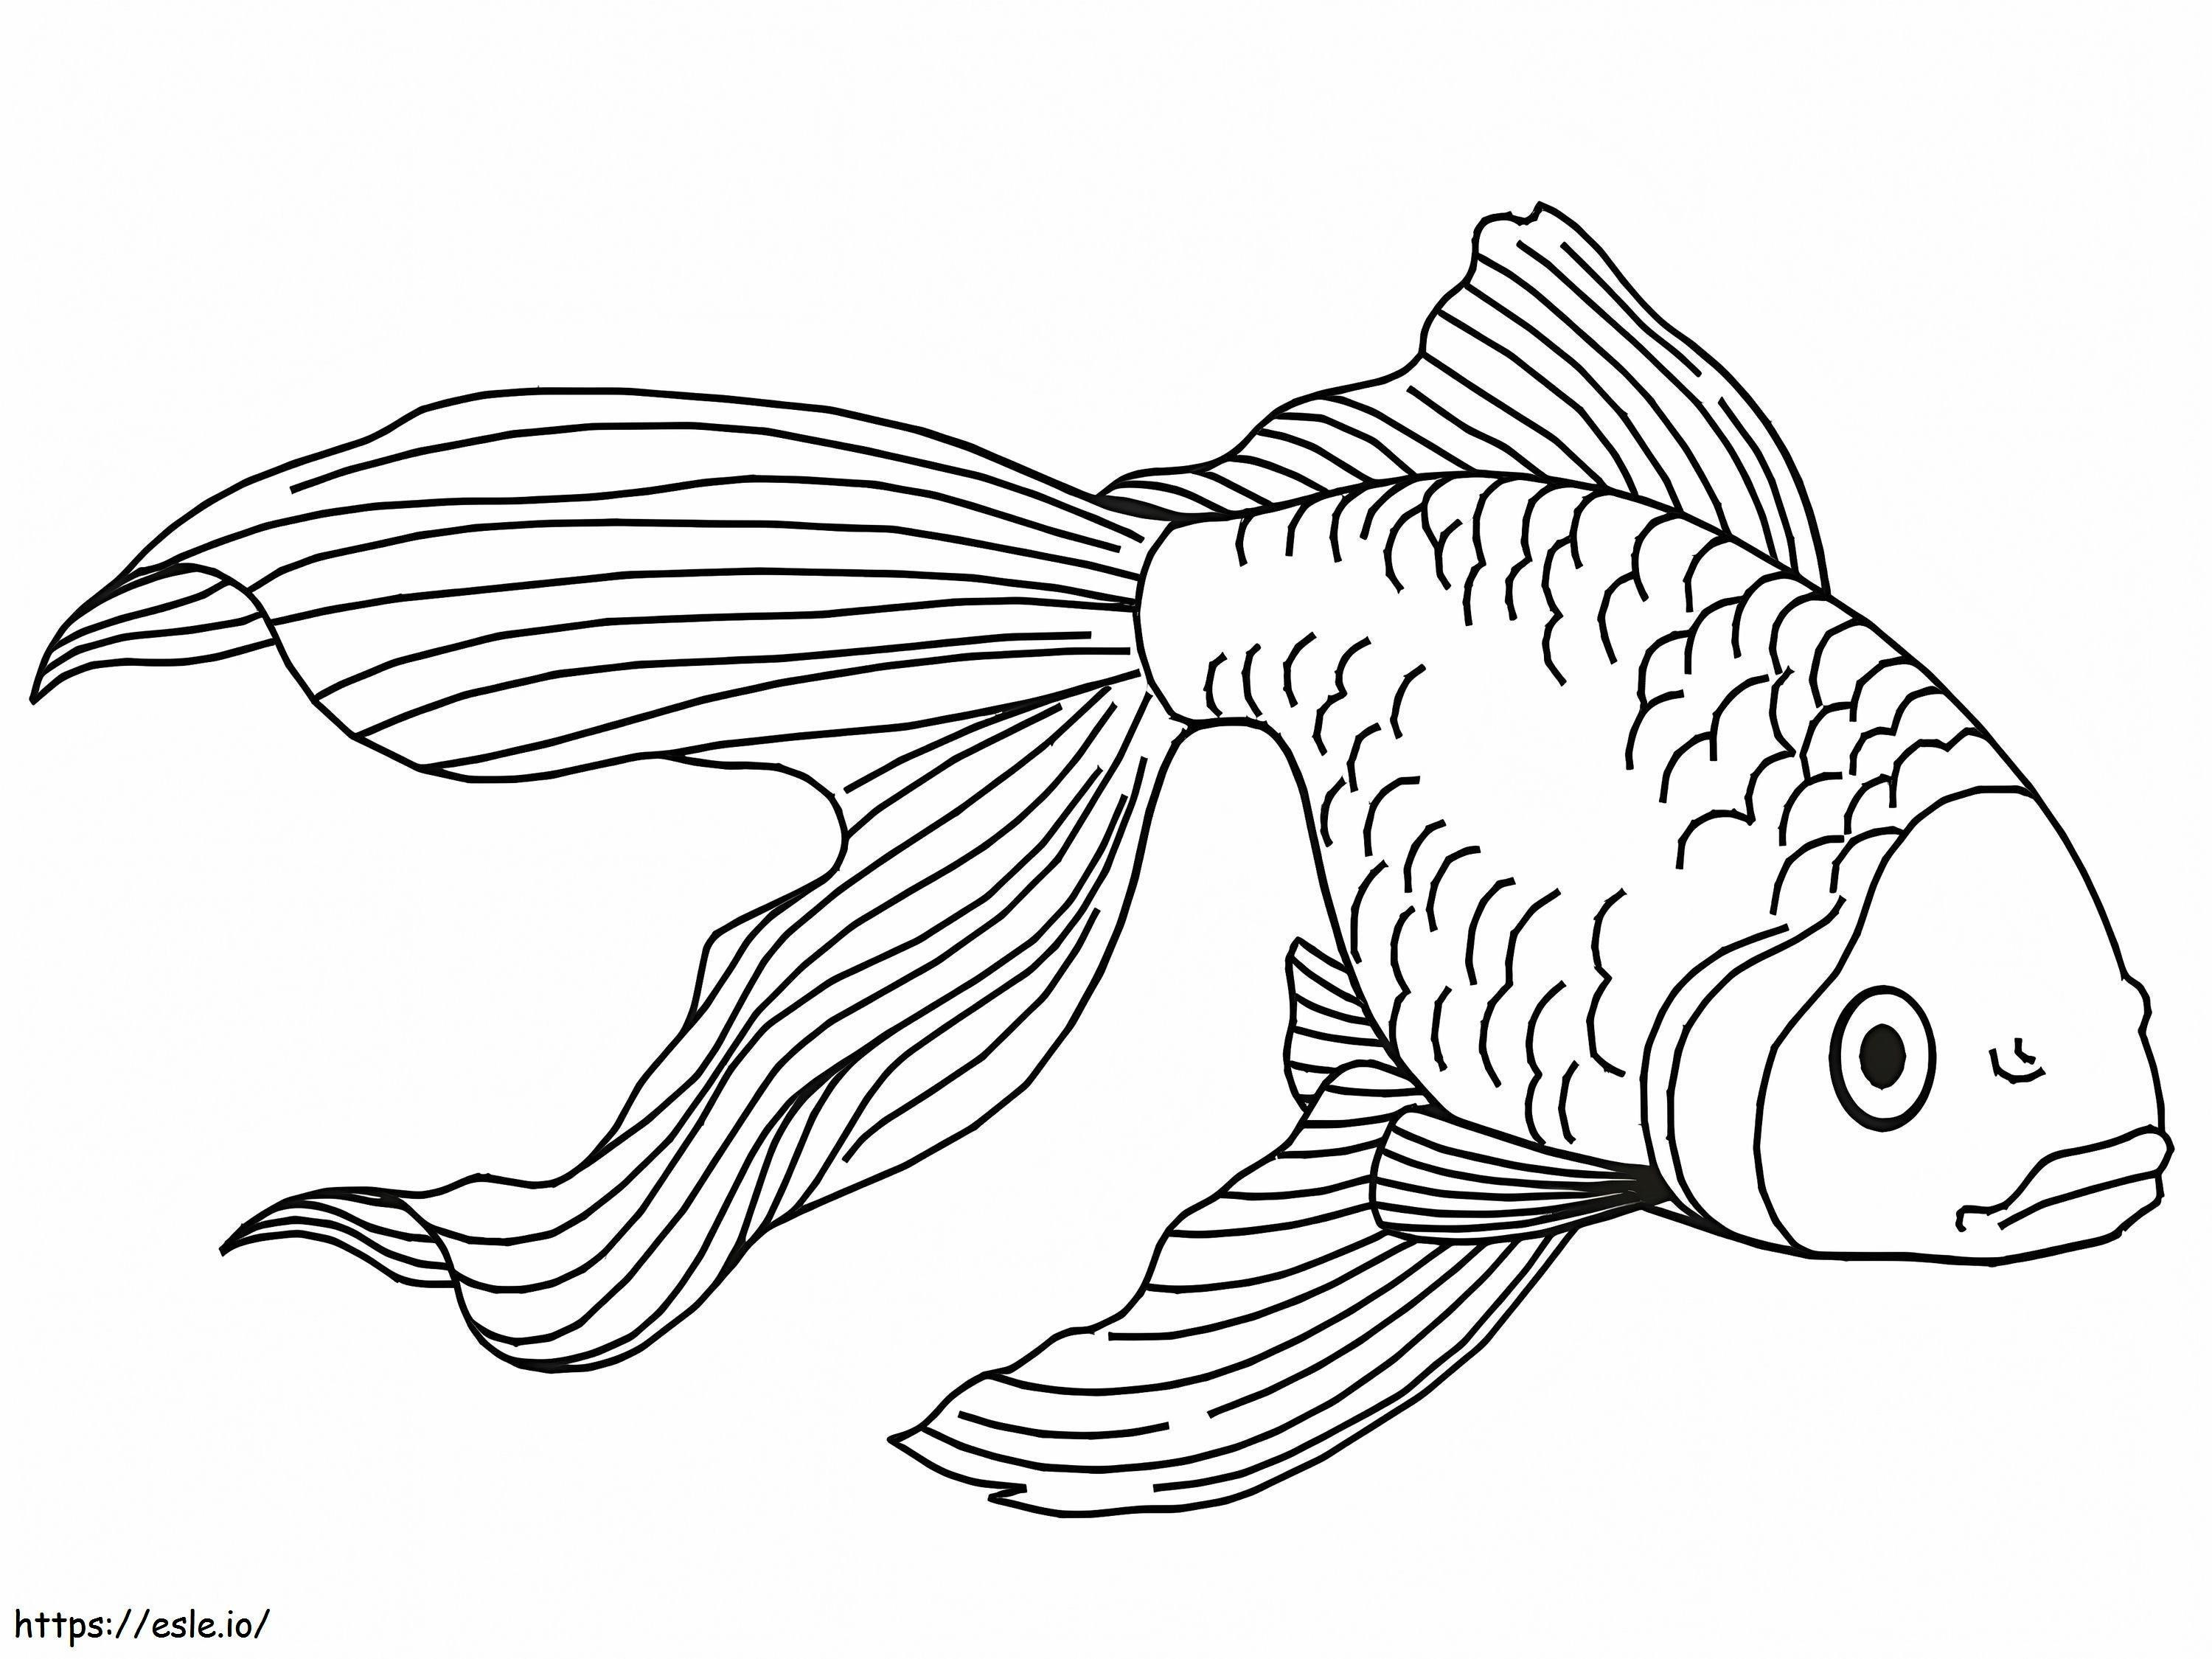 Goldfish 2 coloring page